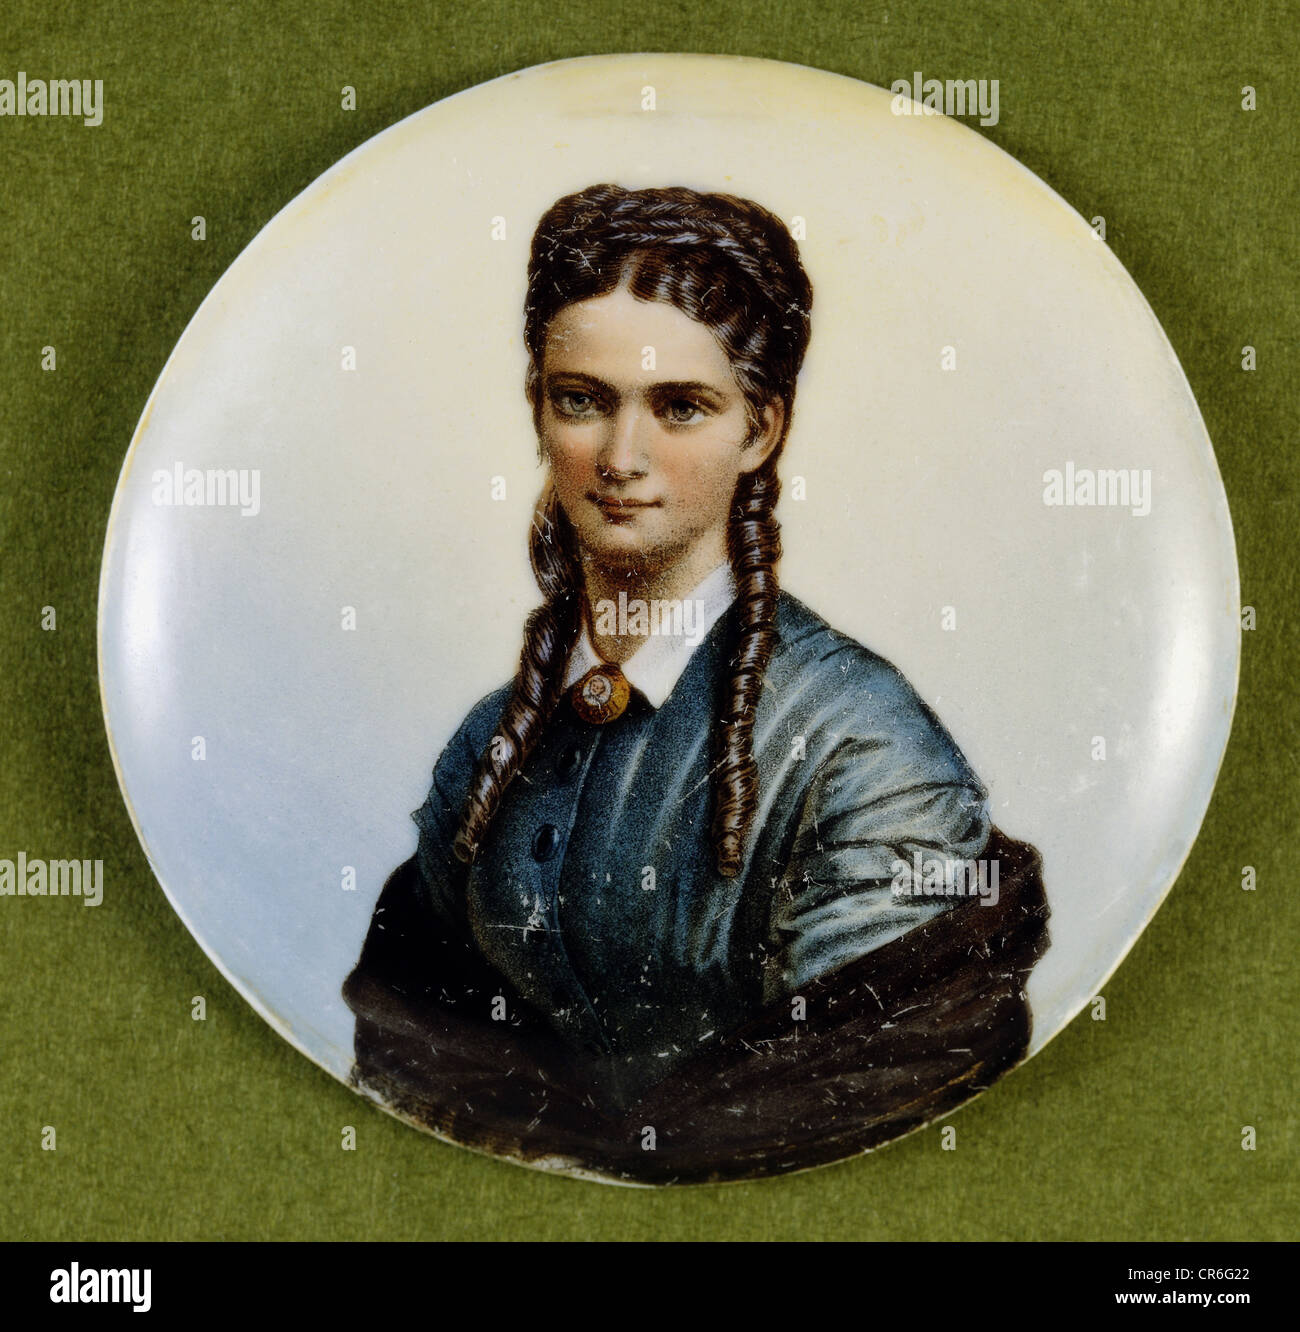 Sophie Charlotte, 23.2.1847 - 4.5.1897, Duchess of Alencon 28.9.1868 - 4.5.1897, portrait, painted beer jug lid, porcelain painting, Germany, 2nd half 19th century, , Stock Photo